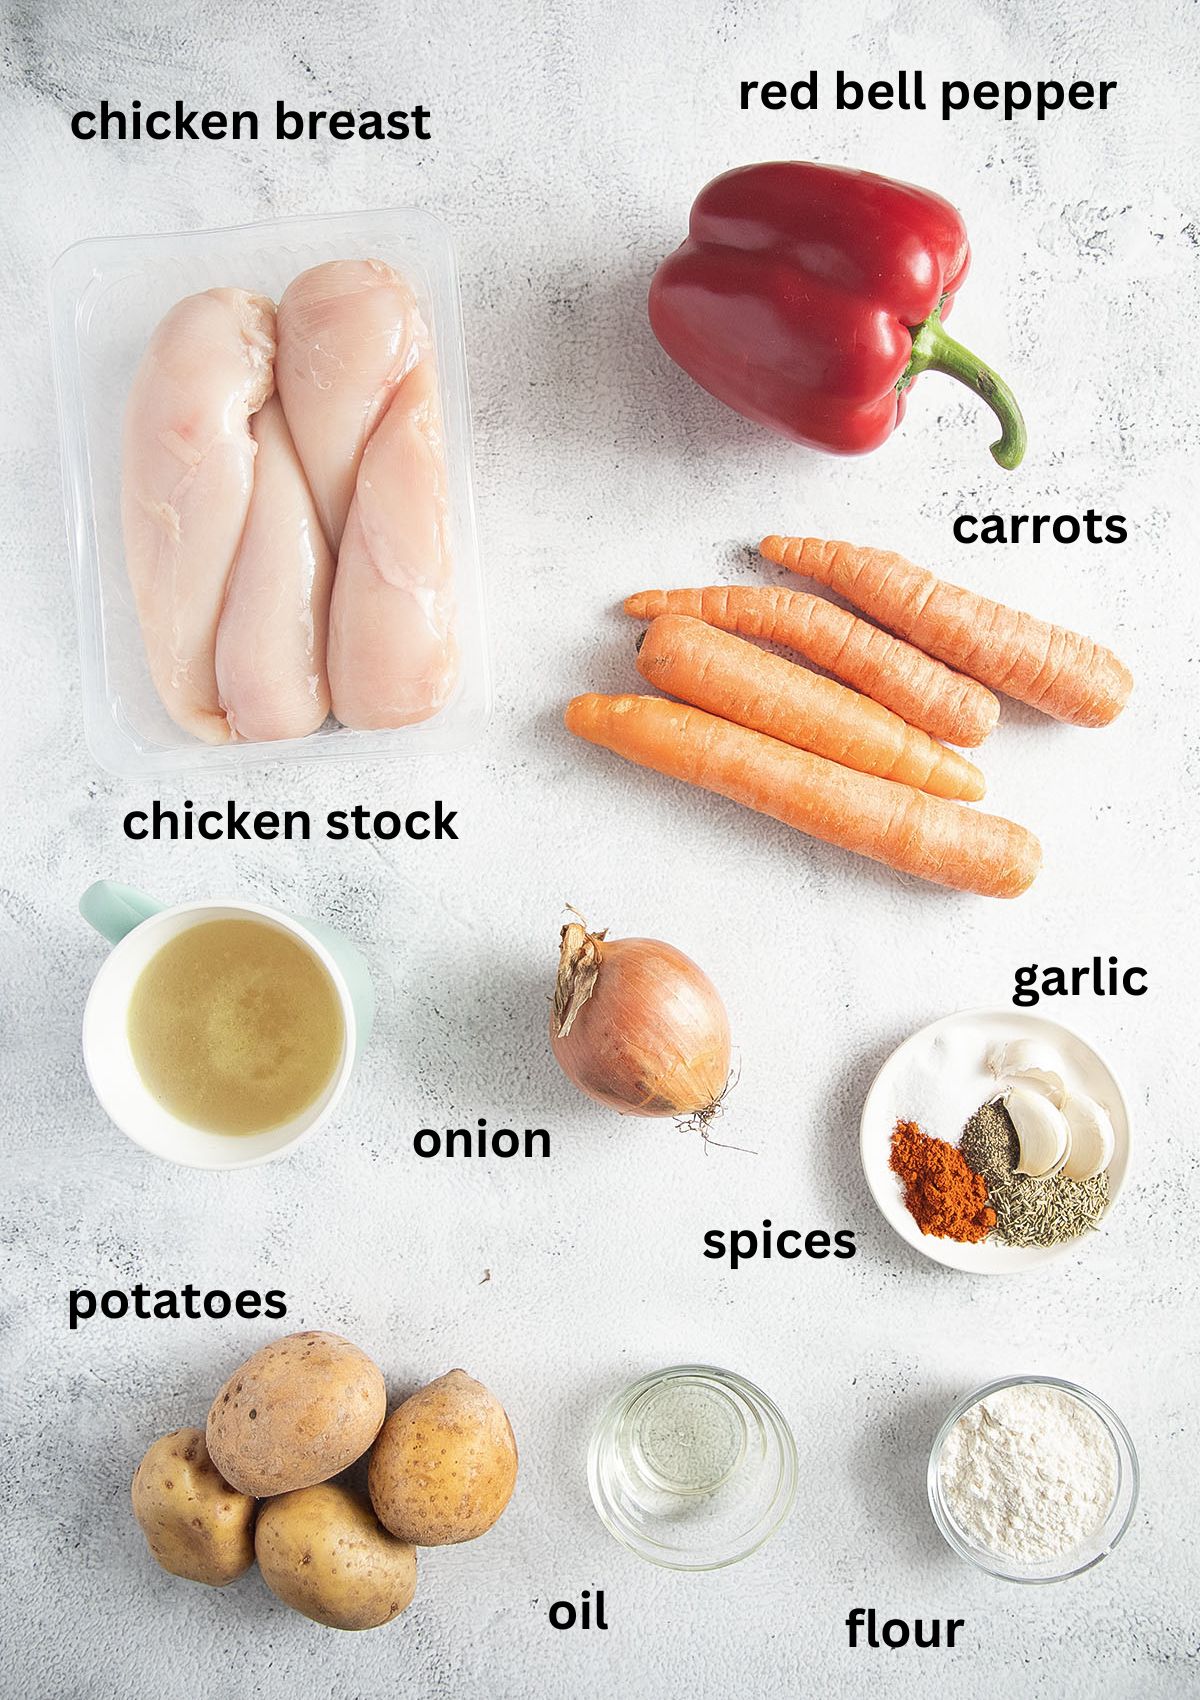 labeled ingredients for making chicken breast with potatoes, vegetables and broth.